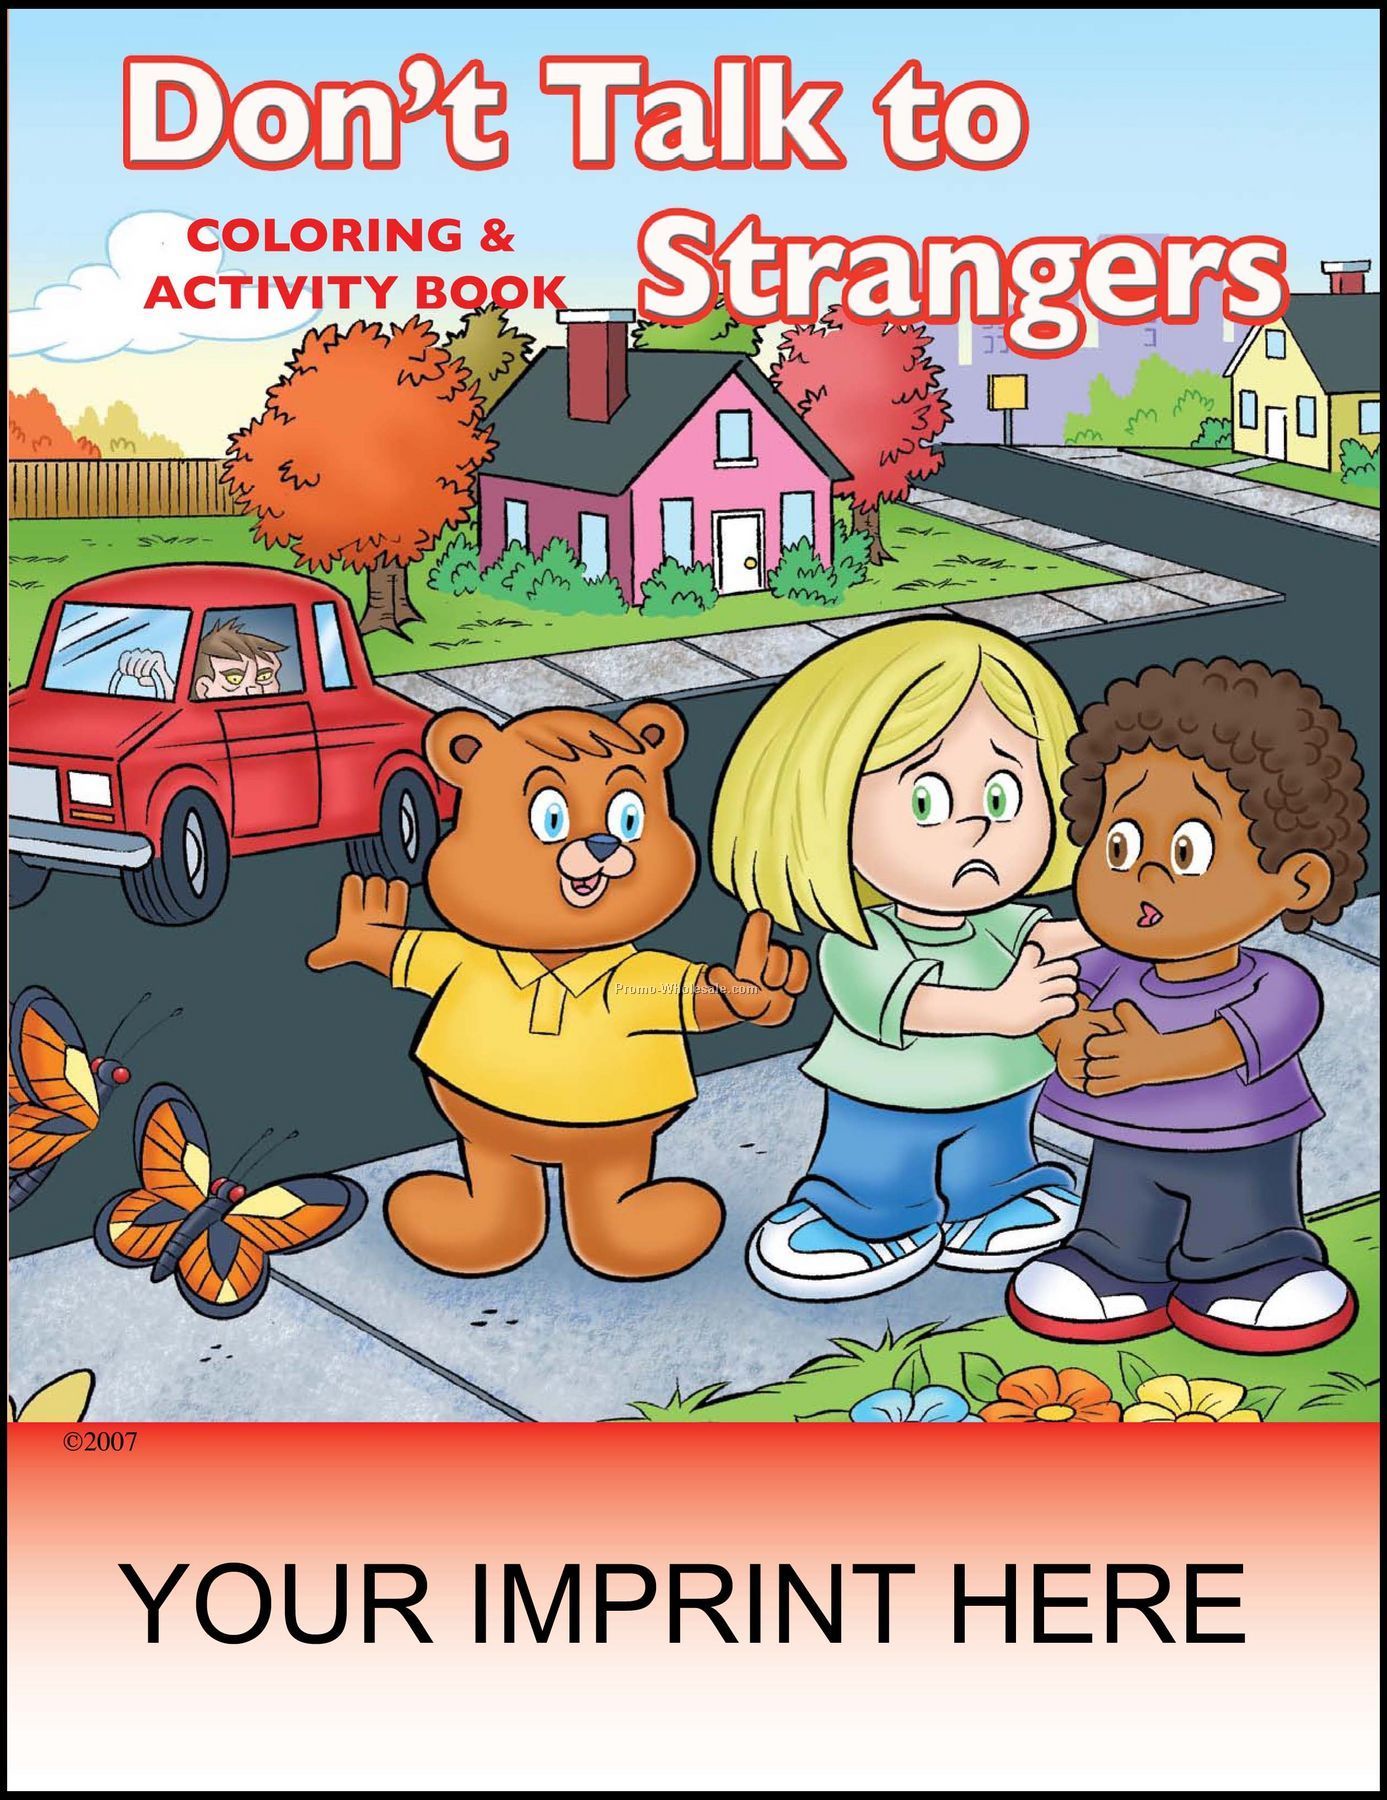 8-3/8"x10-7/8" Don't Talk To Strangers Coloring & Activity Book